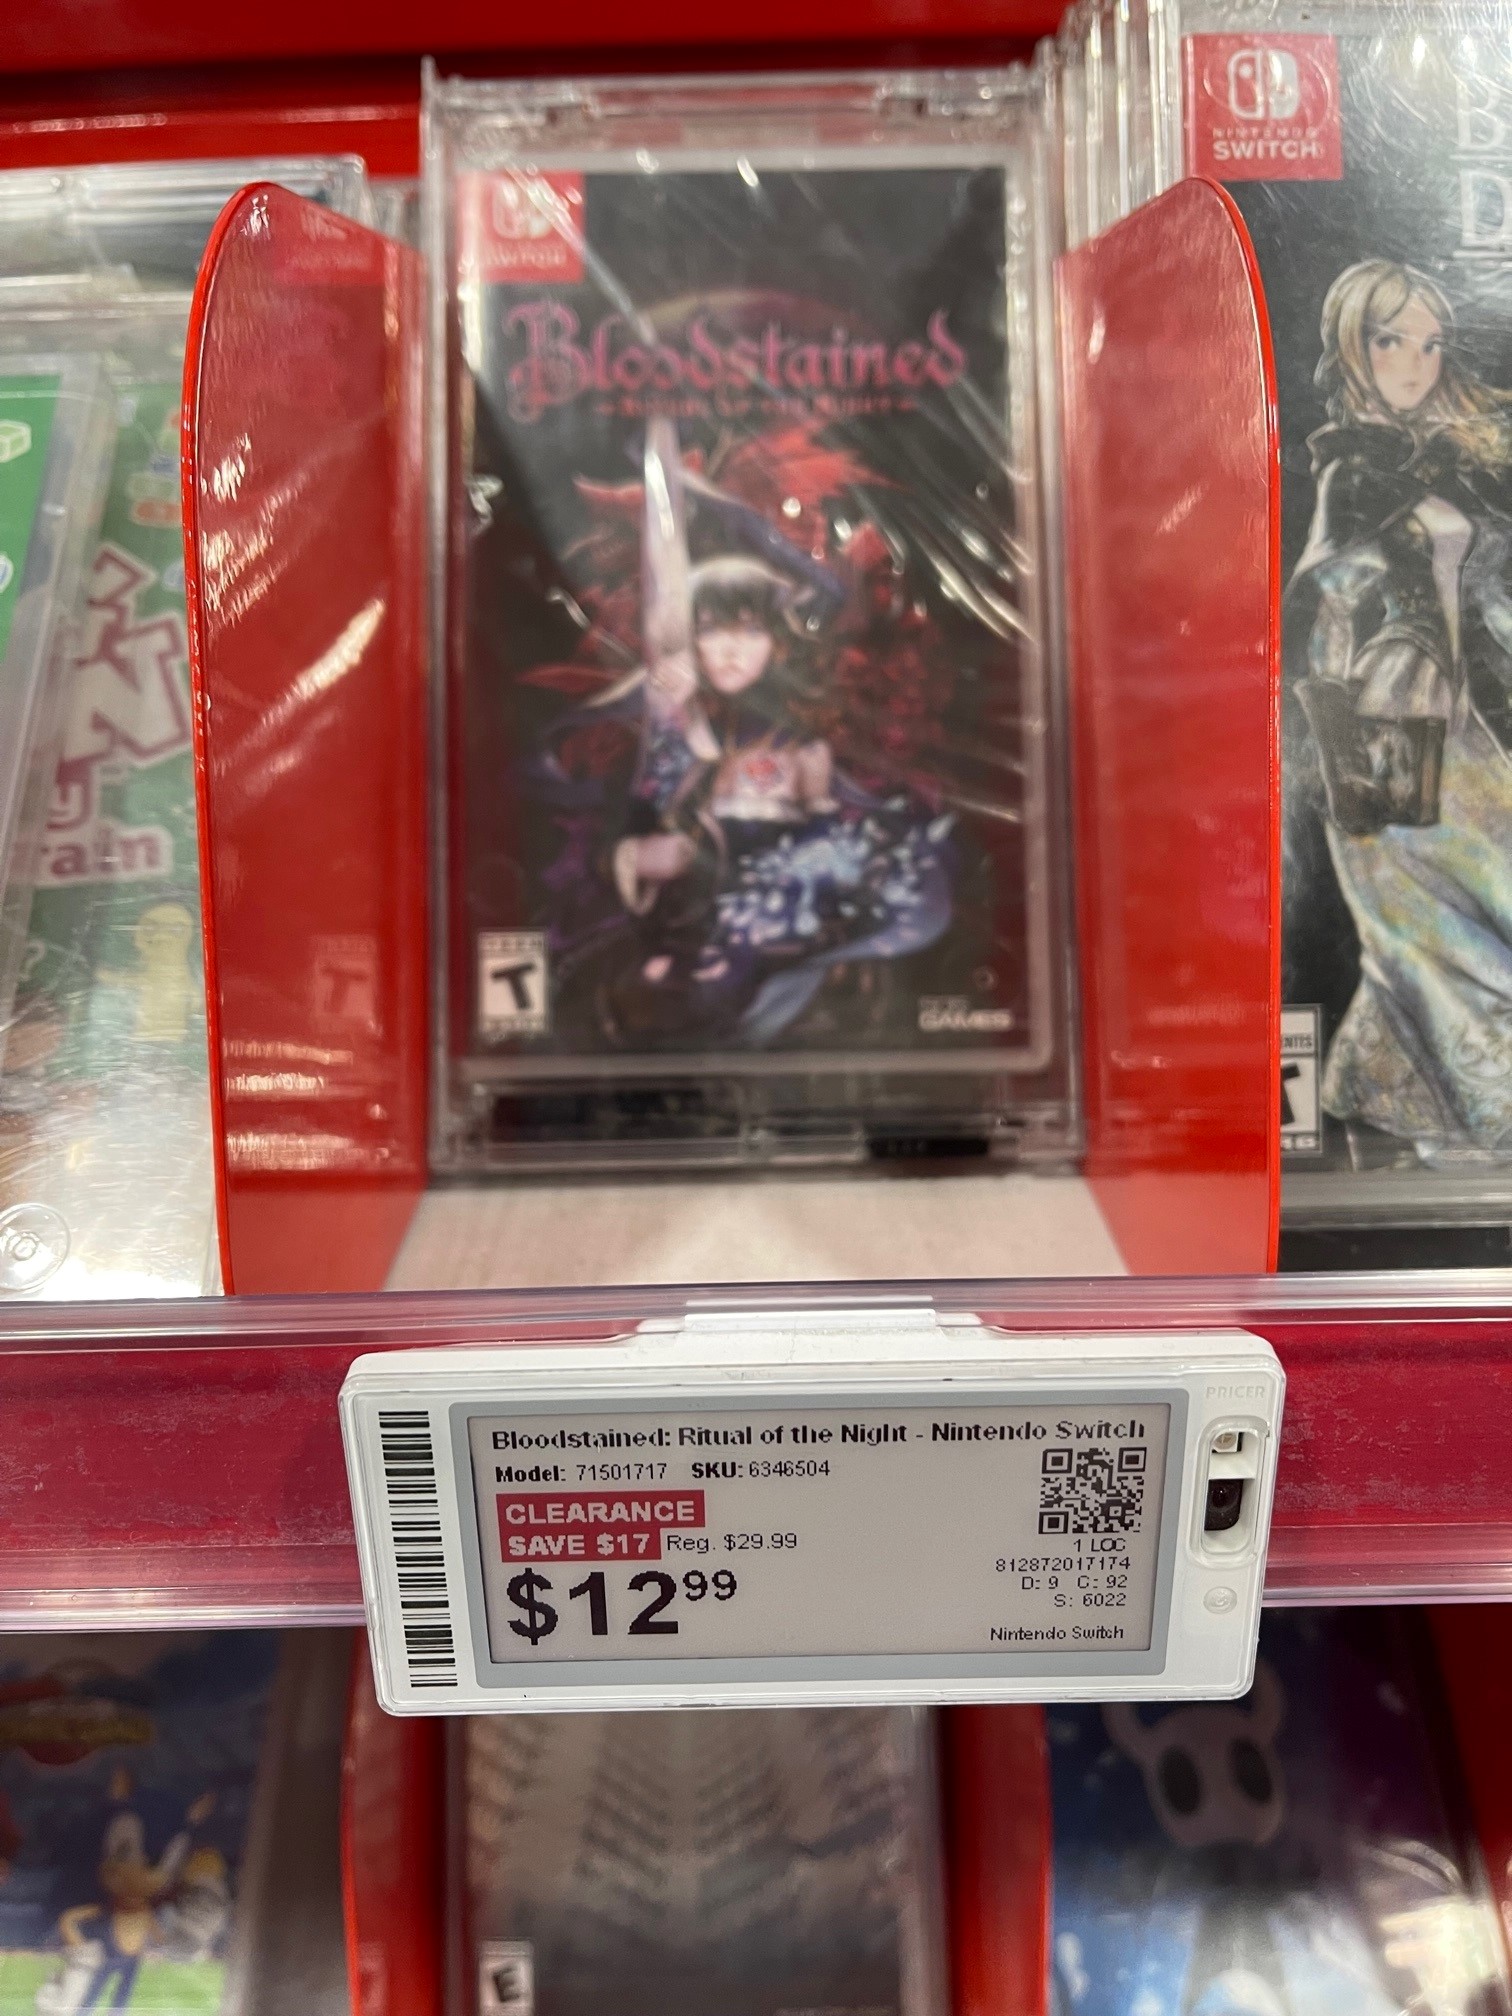 Nintendo Switch - Bloodstained: Ritual of the Night - $12.99 - YMMV